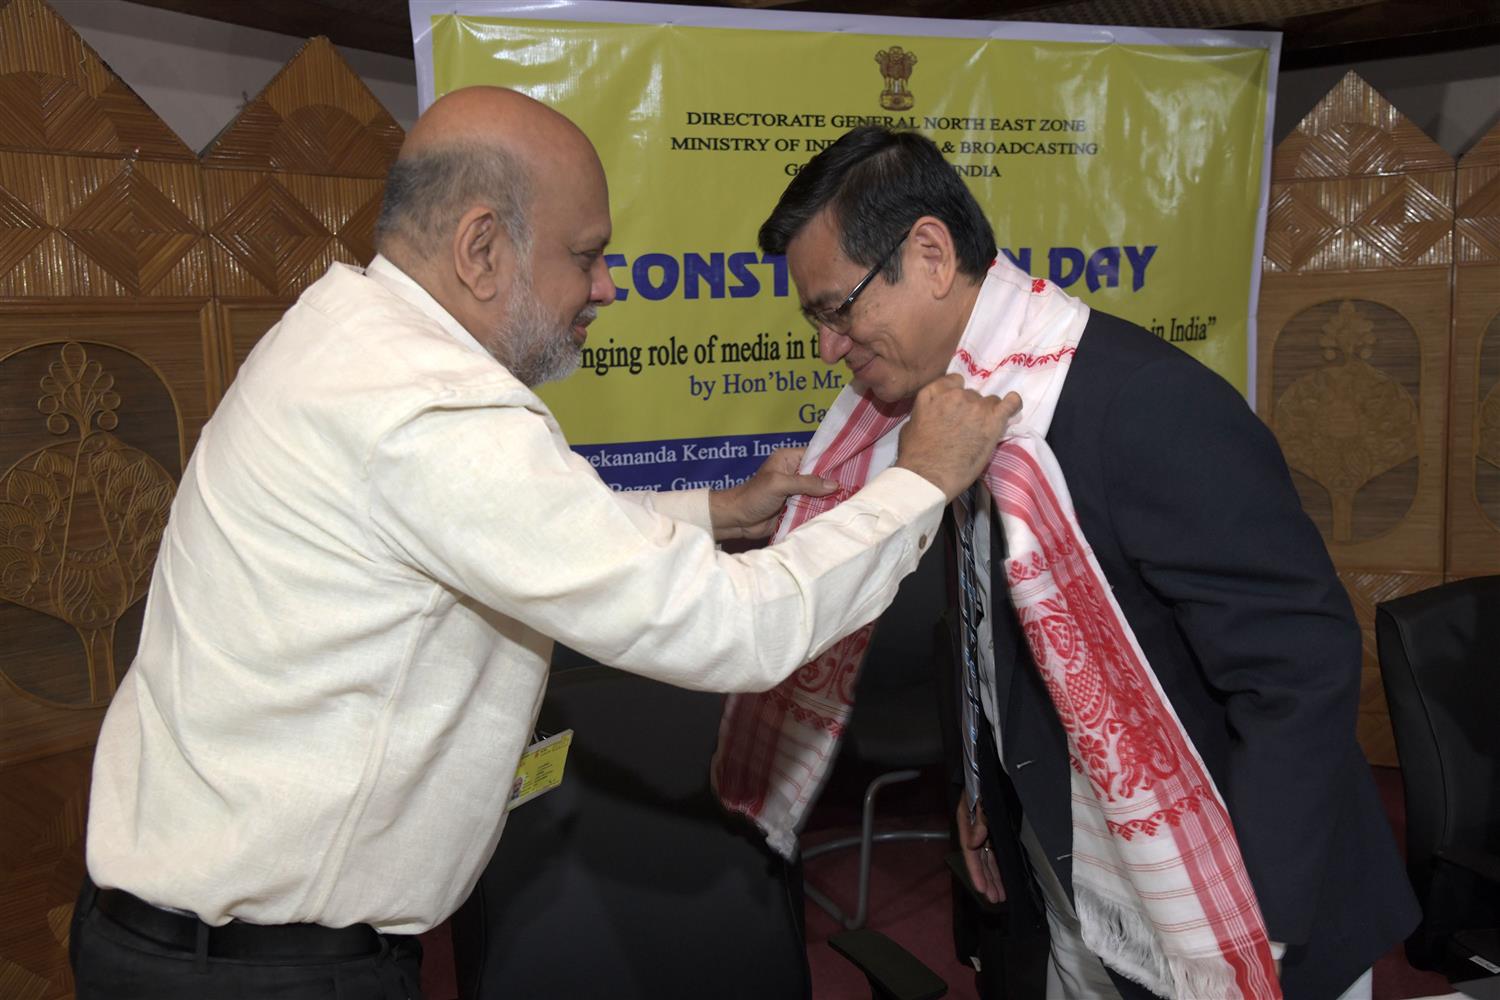 JUSTICE GUWAHATI HIGH COURT SHRI KOTISWAR SINGH IS BEING WELCOME BY SHRI L R VISHWANATH, DIRECTOR GENERAL, MINISTRY OF INFORMATION & BROADCASTING AT A FUNCTION OF THE 70TH CONSTITUTION DAY “CHALLENGING ROLE OF MEDIA IN THE DYNAMICS OF CONSTITUTIONAL CHANGES IN INDIA” BY REGIONAL OUTREACH BUREAU MINISTRY OF INFORMATION & BROADCASTING, GUWAHATI ON 26TH NOVEMBER 2019 AT GUWAHATI.